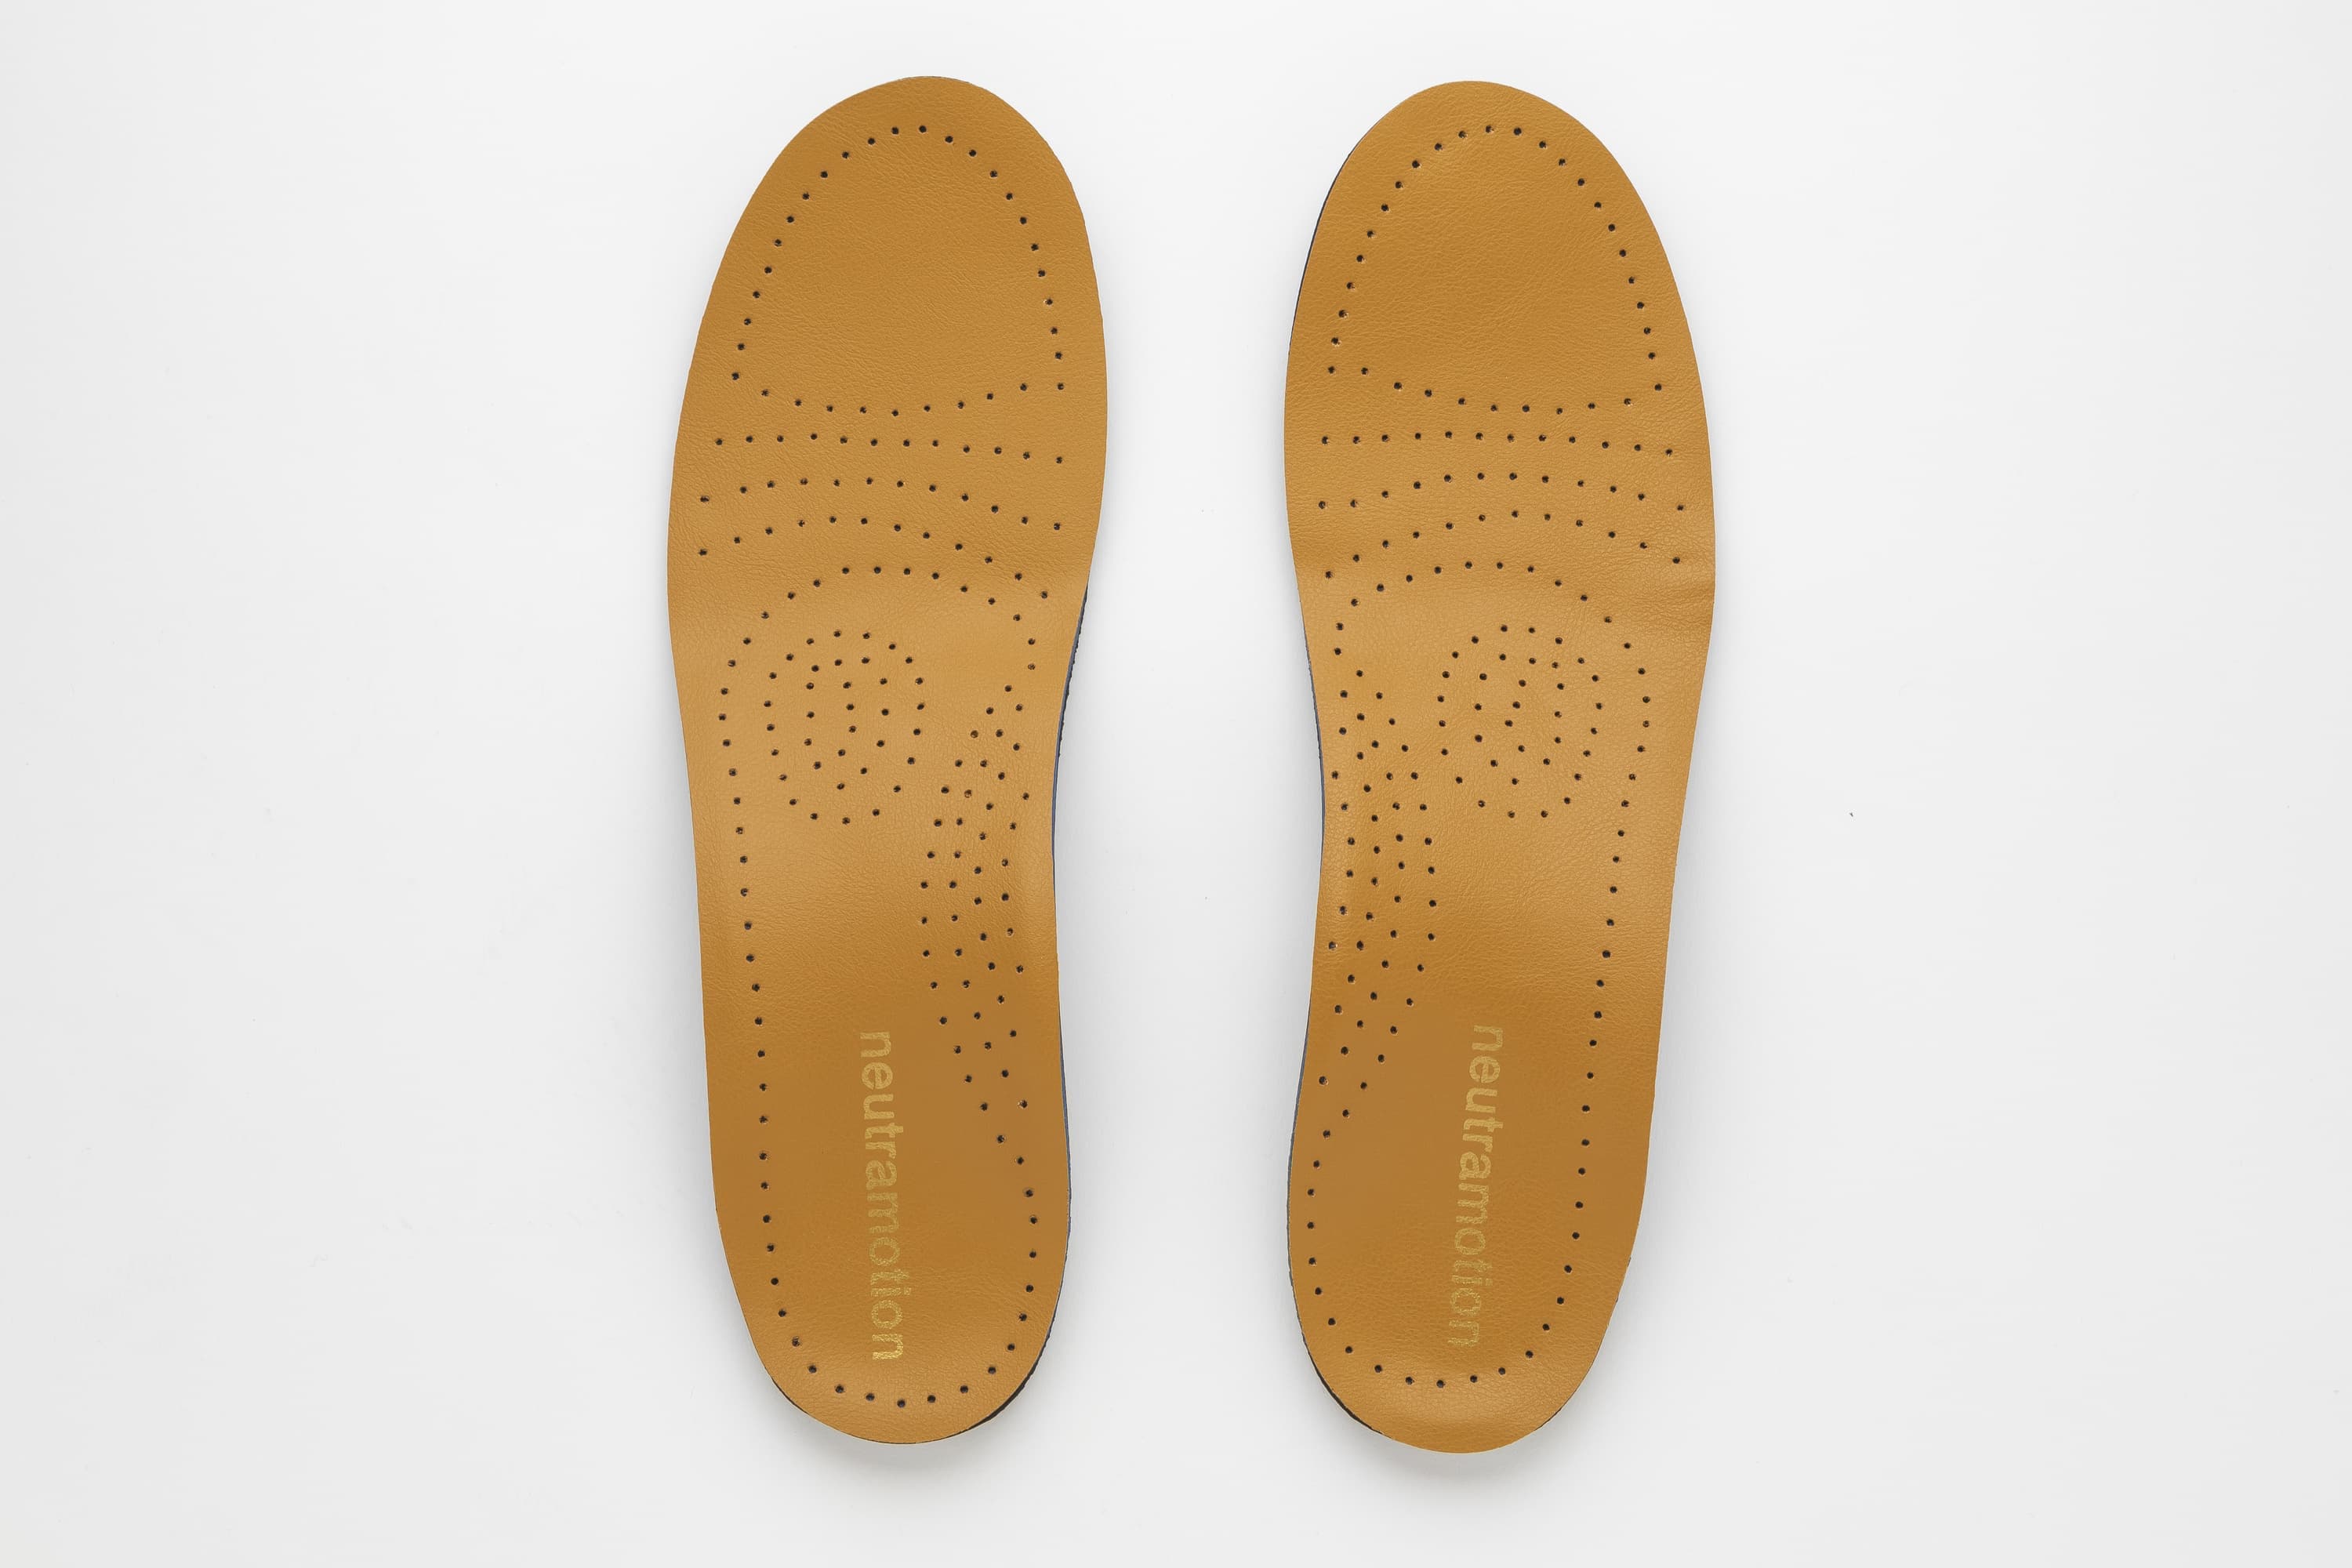 Presenting the Neutramotion Leather Insoles, which bring comfort to leather shoes and promote good posture.